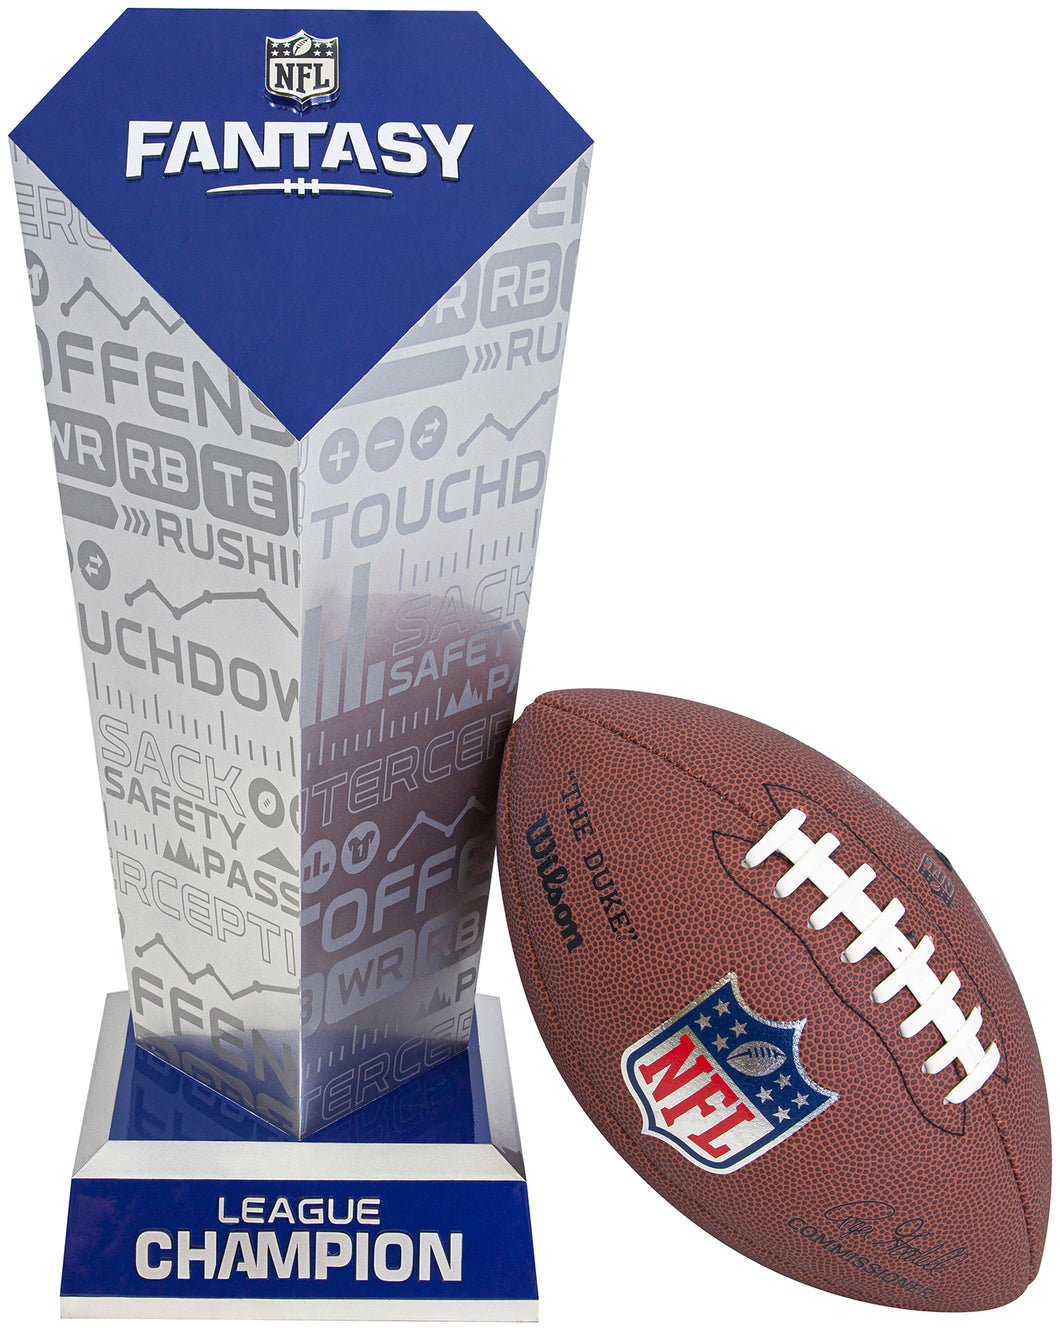 Officially Licensed NFL Fantasy Football Trophy - ORDER NOW AND GET FREE SHIPPING!!!